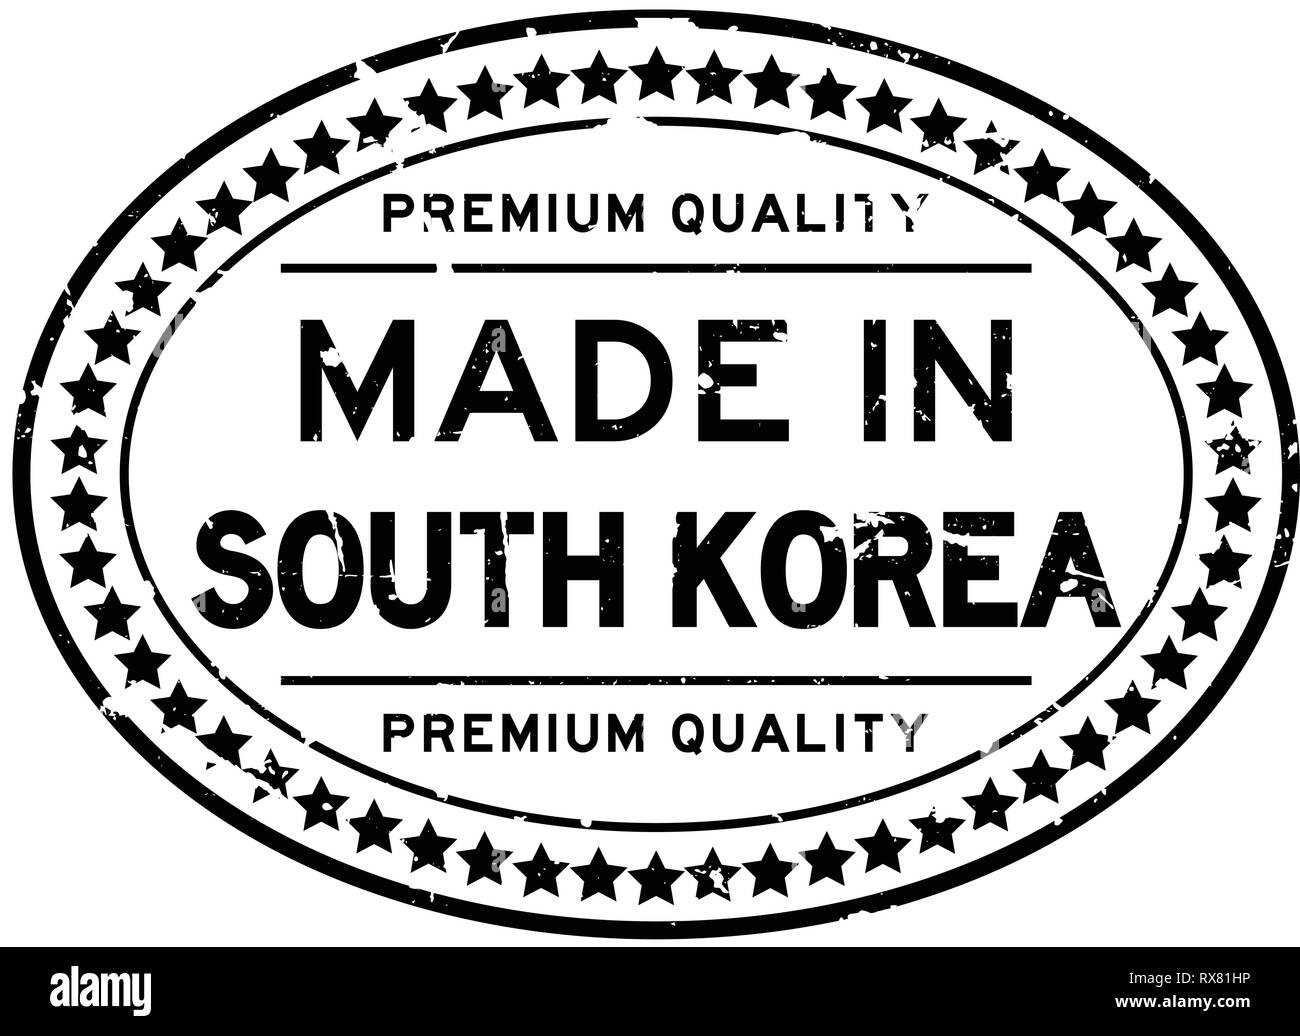 Grunge black premium quality made in south korea oval rubber seal stamp on white background Stock Vector